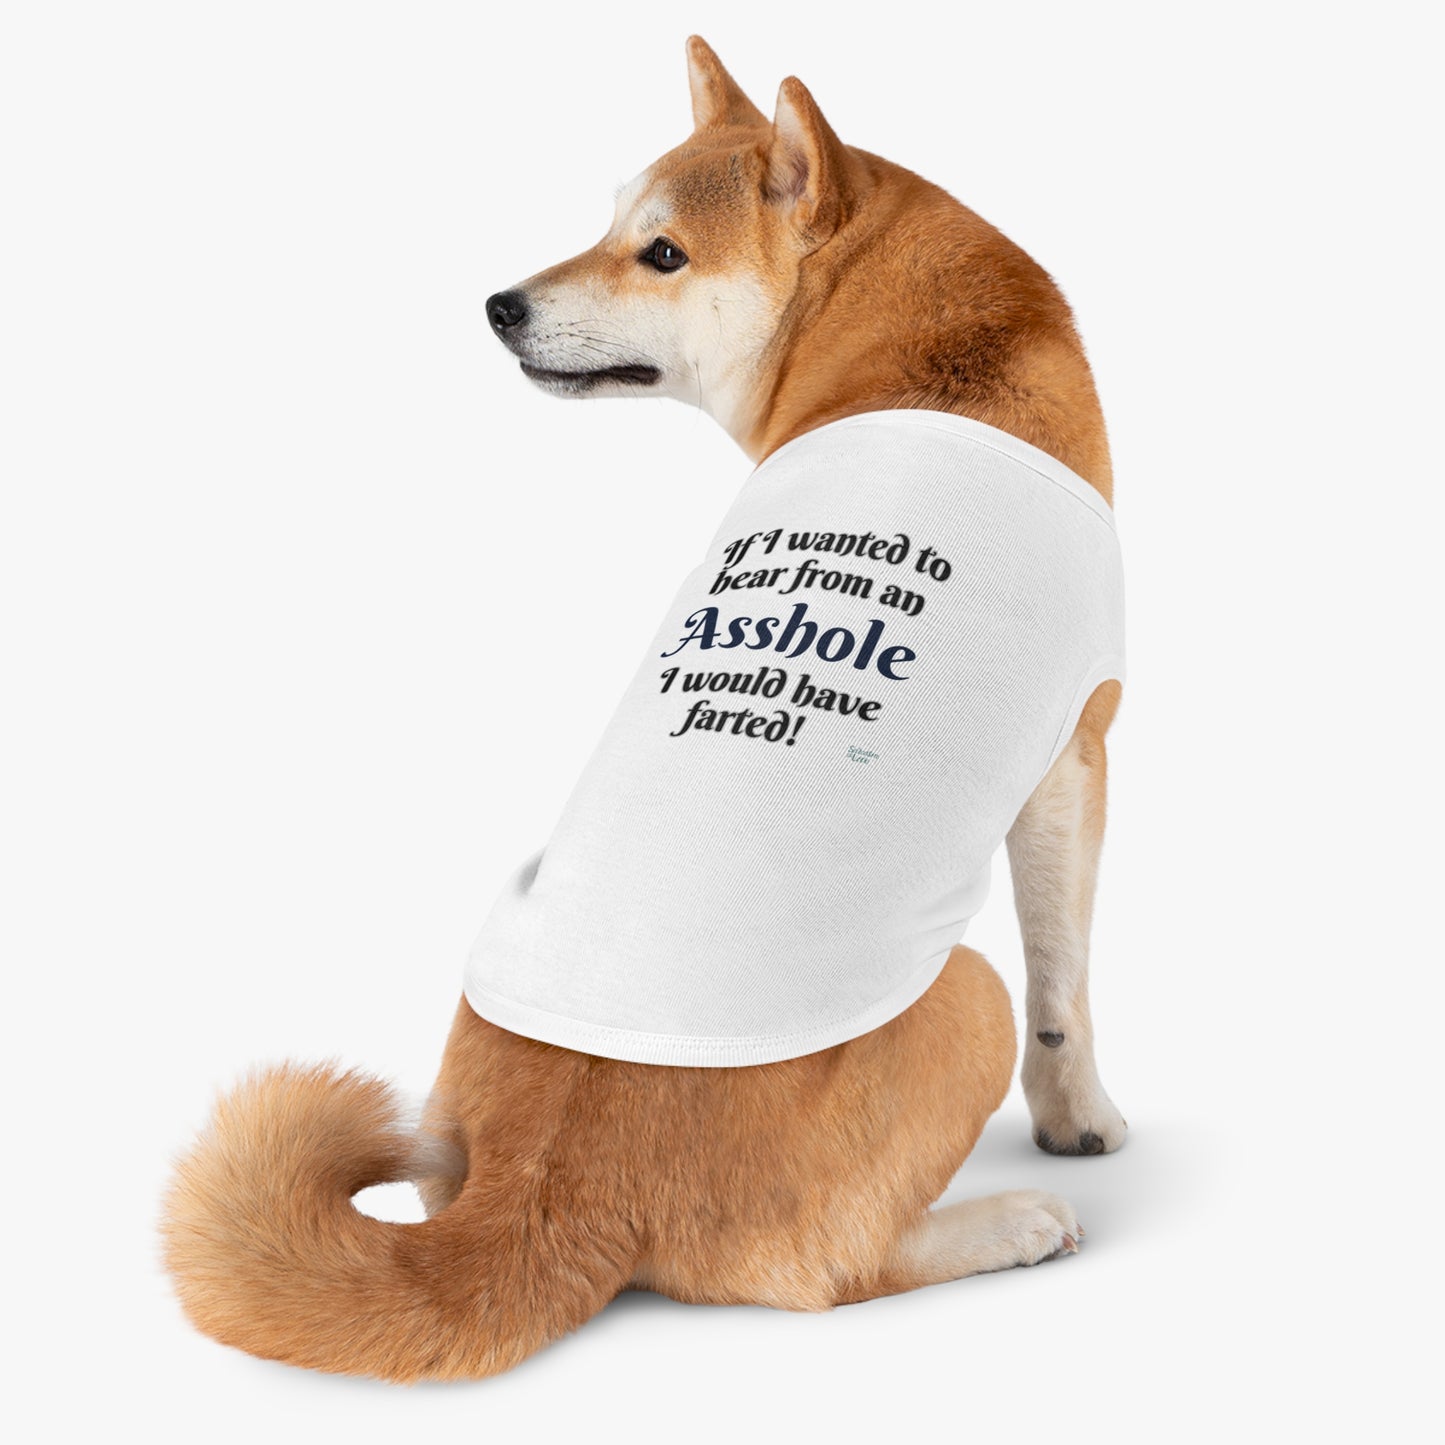 If I Wanted to Hear from an Asshole, I Would Have Farted Pet Tank Top - A Witty Expression of Pet's Selective Listening